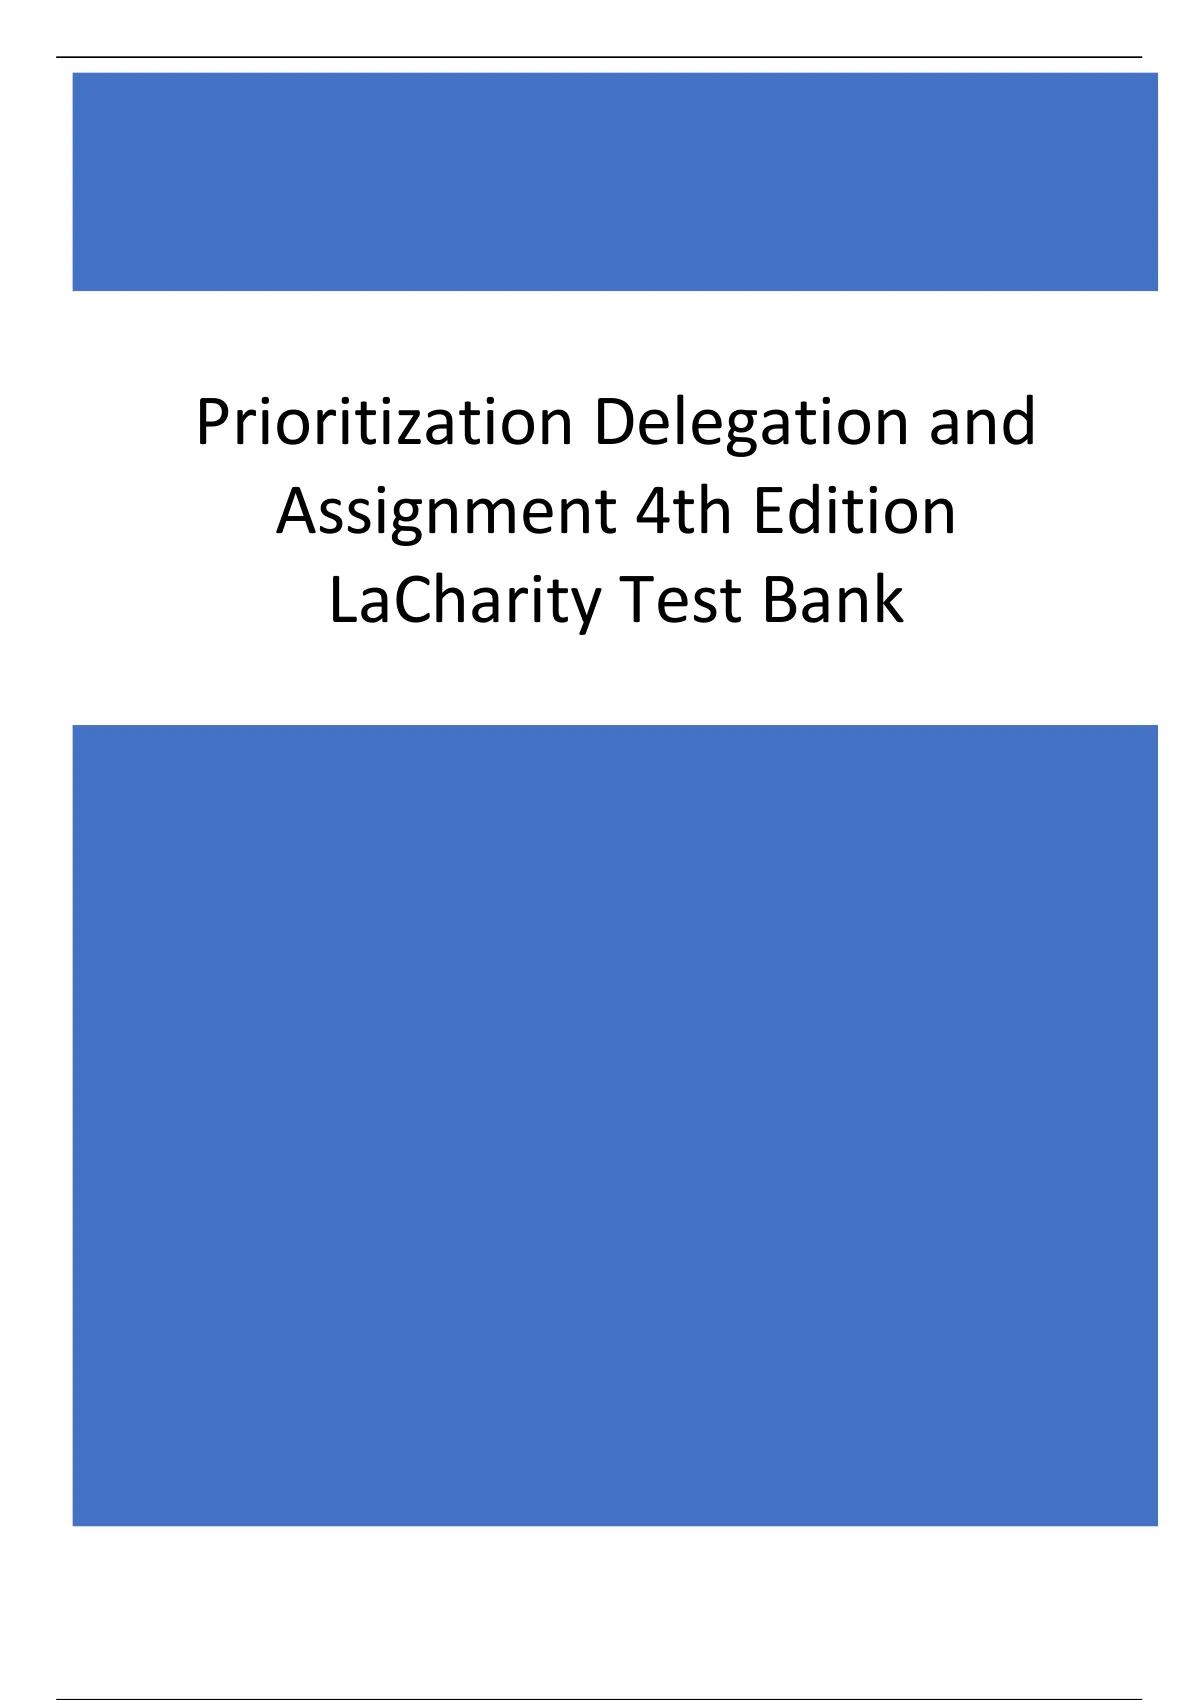 prioritization delegation and assignment 4th edition pdf free